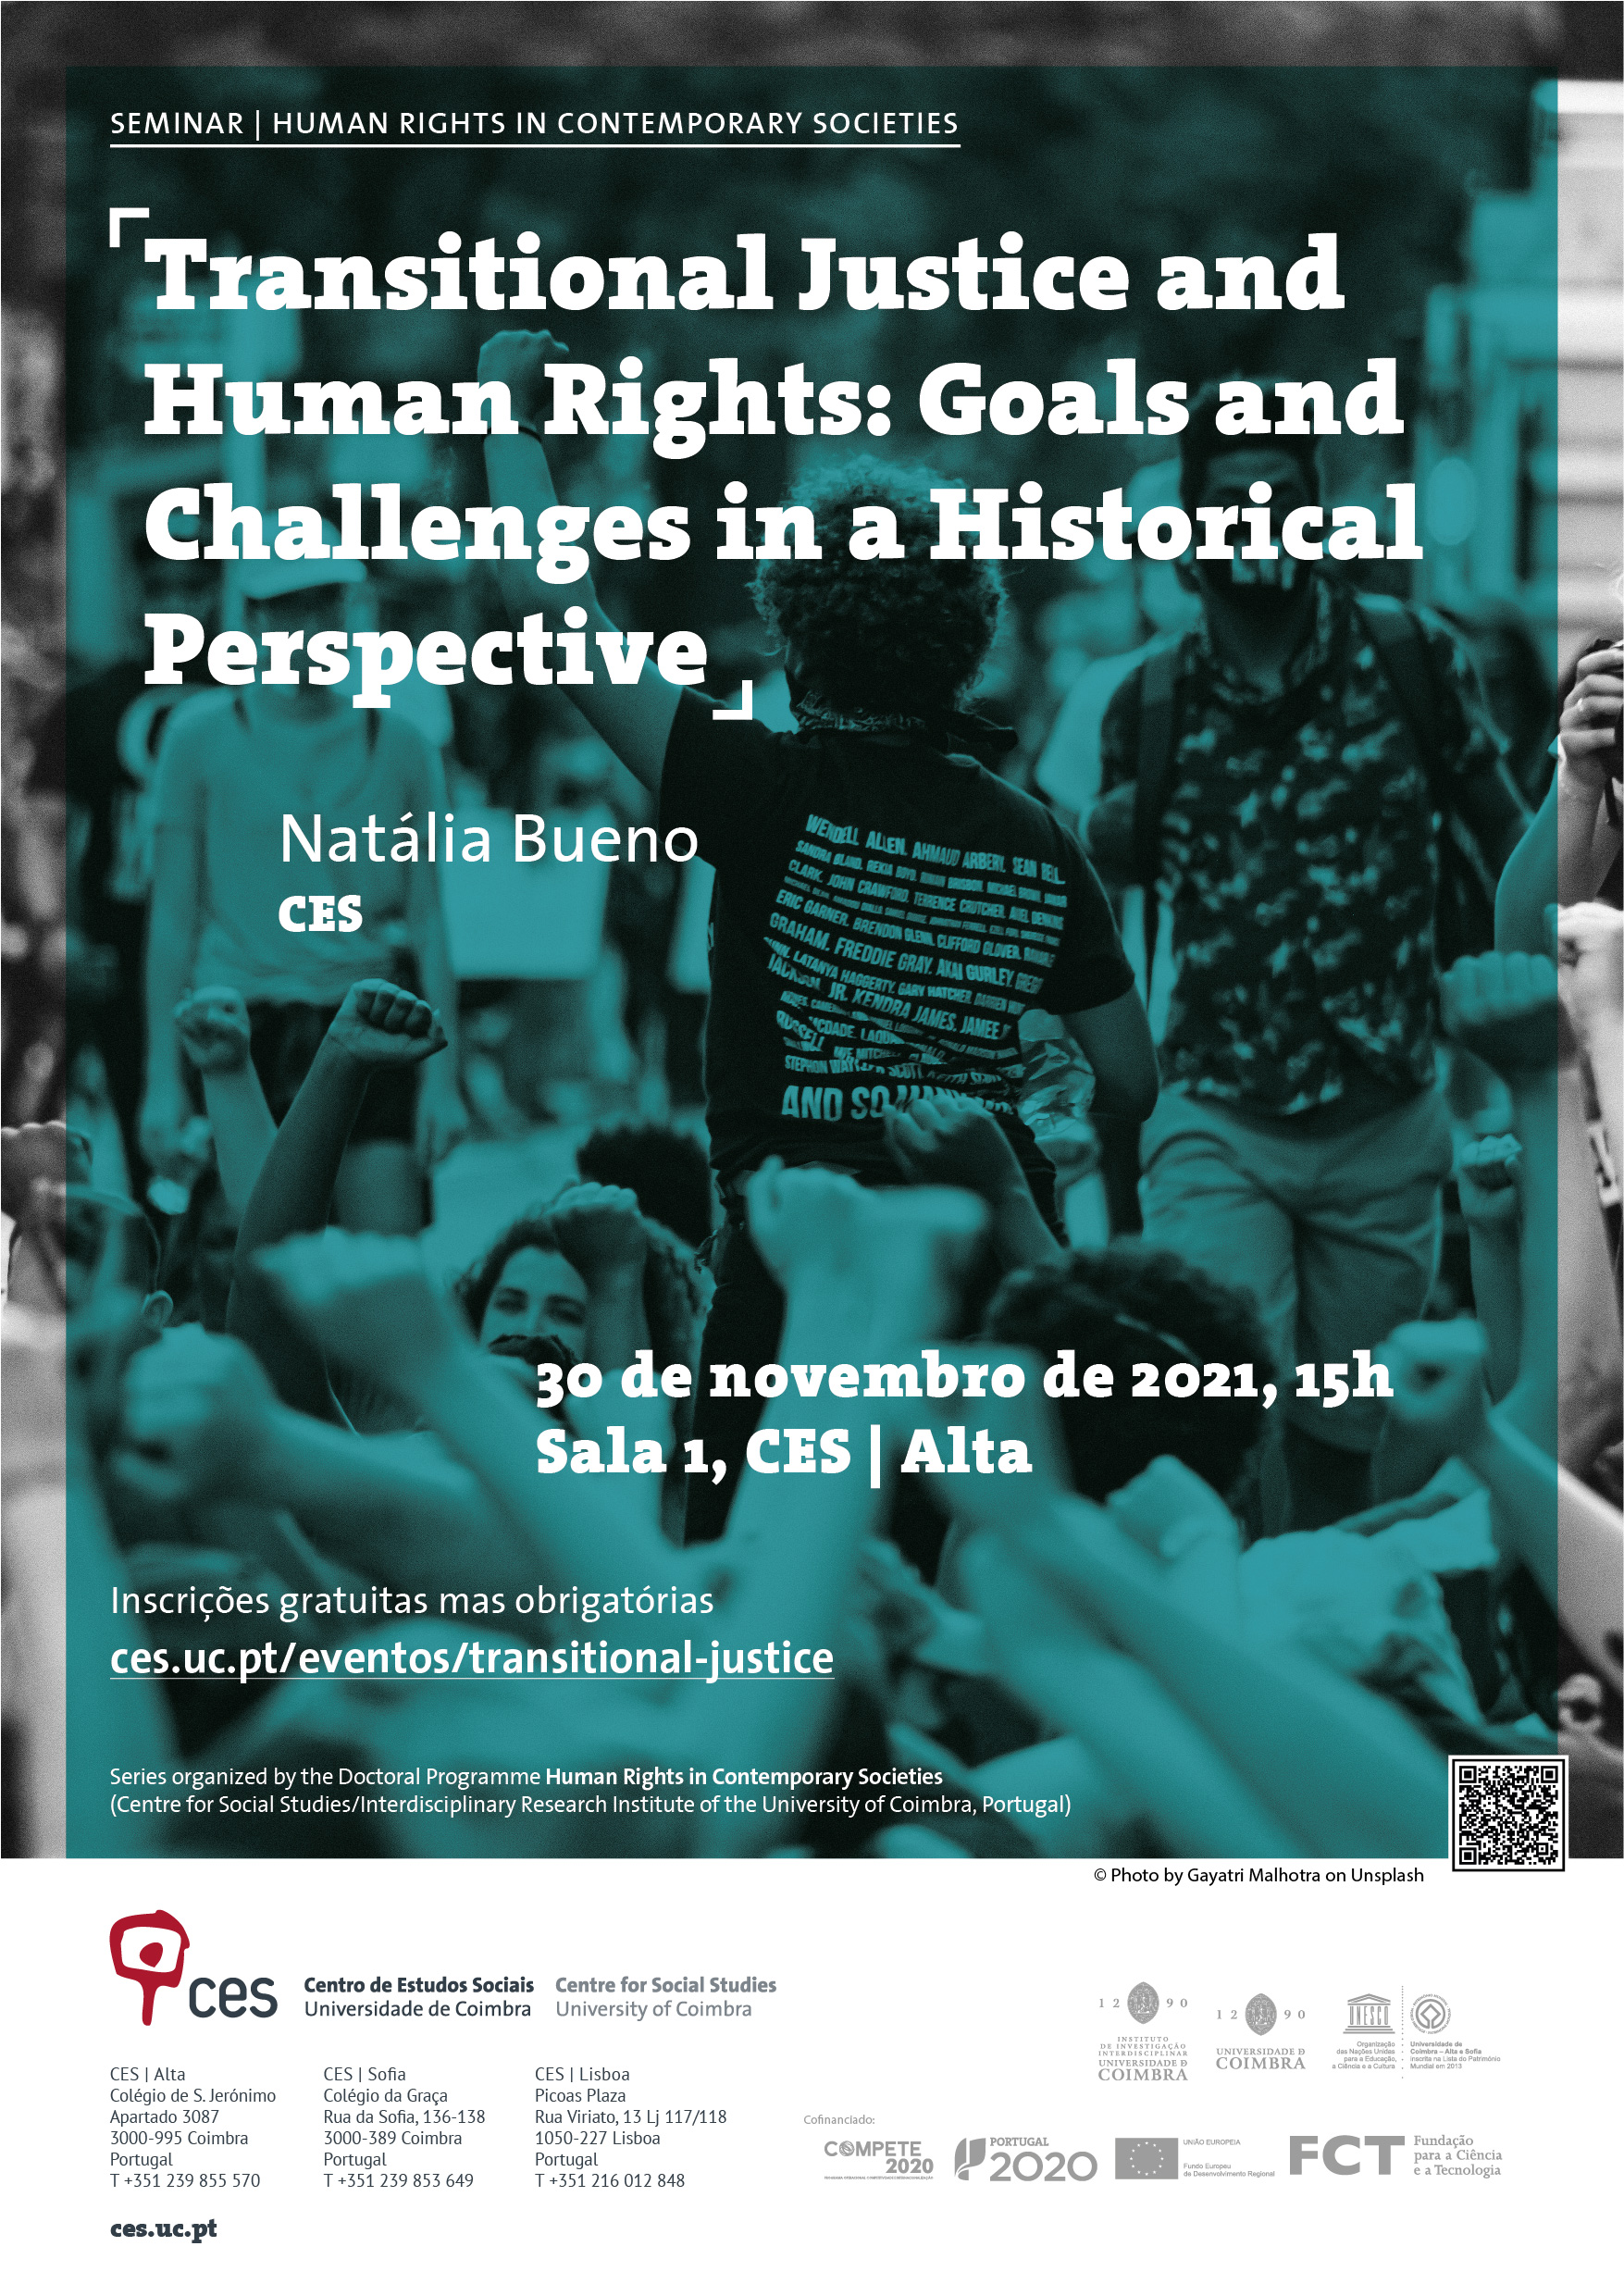 Transitional Justice and Human Rights: Goals and Challenges in a Historical Perspective<span id="edit_35700"><script>$(function() { $('#edit_35700').load( "/myces/user/editobj.php?tipo=evento&id=35700" ); });</script></span>